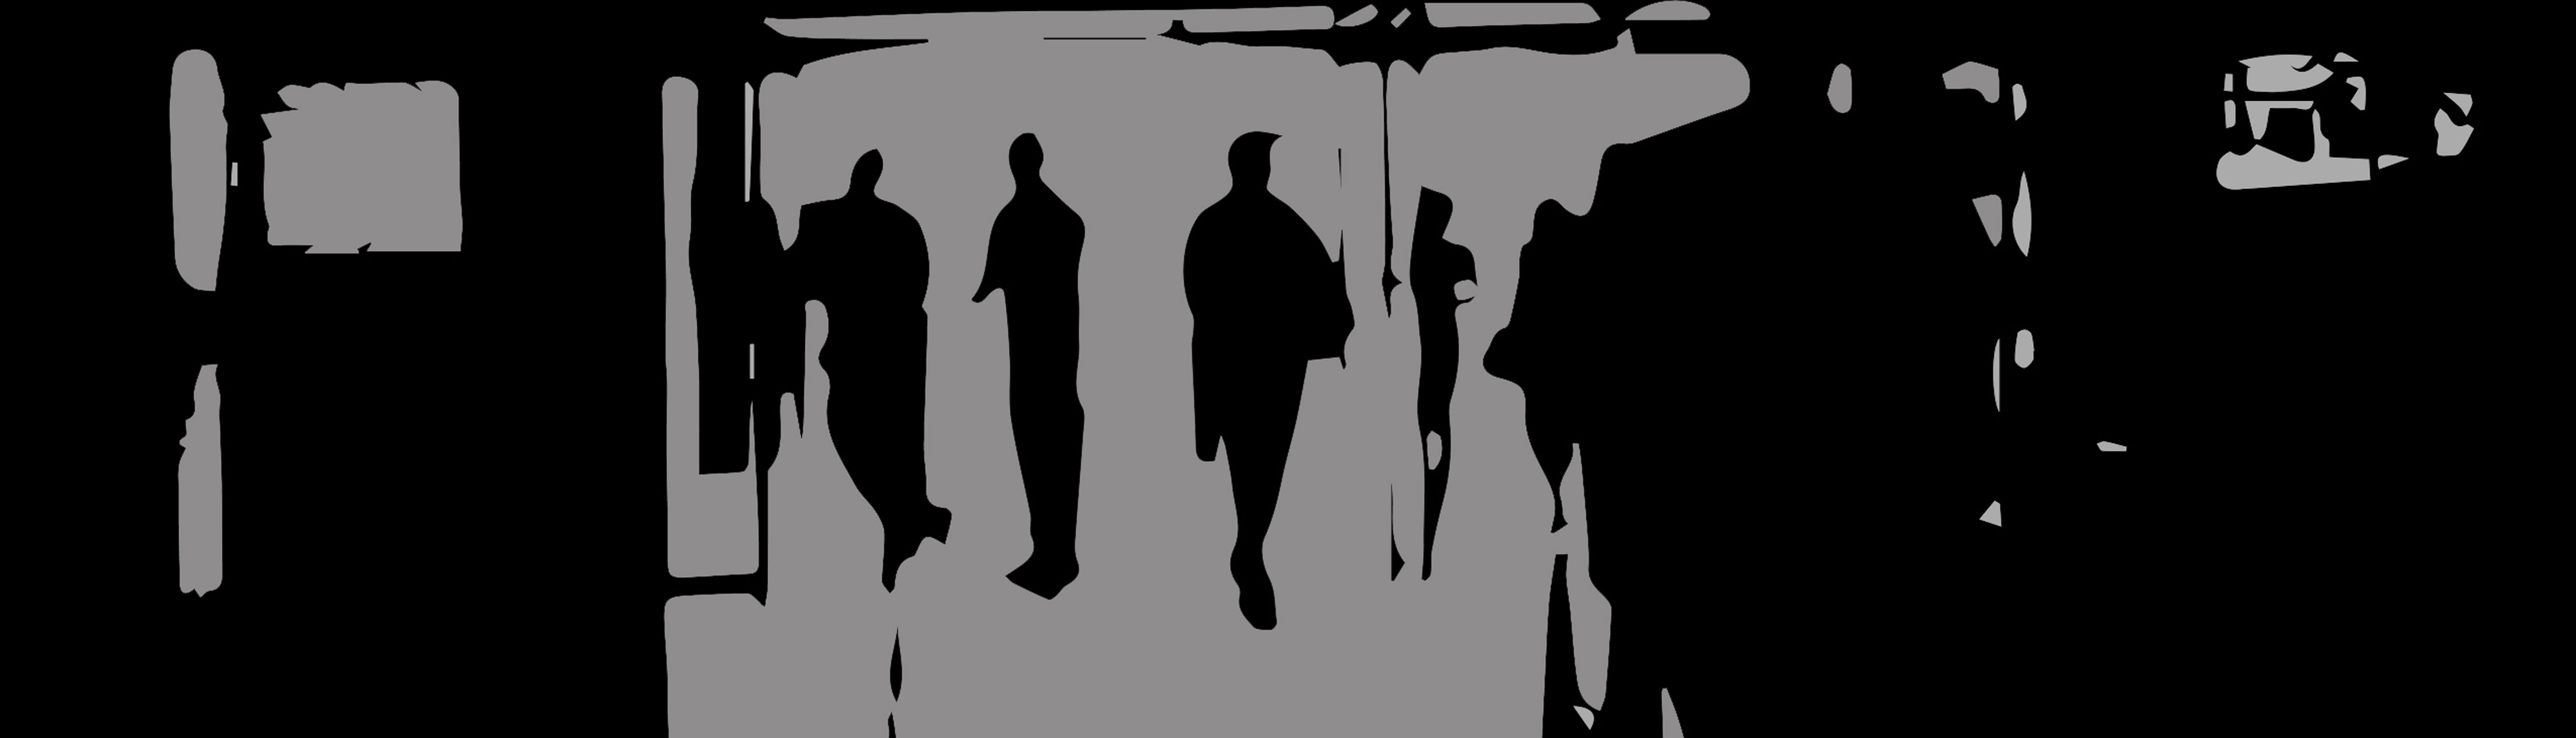 Black and gray image of abstract silhouettes of people standing in a hallway, backlit by an open door